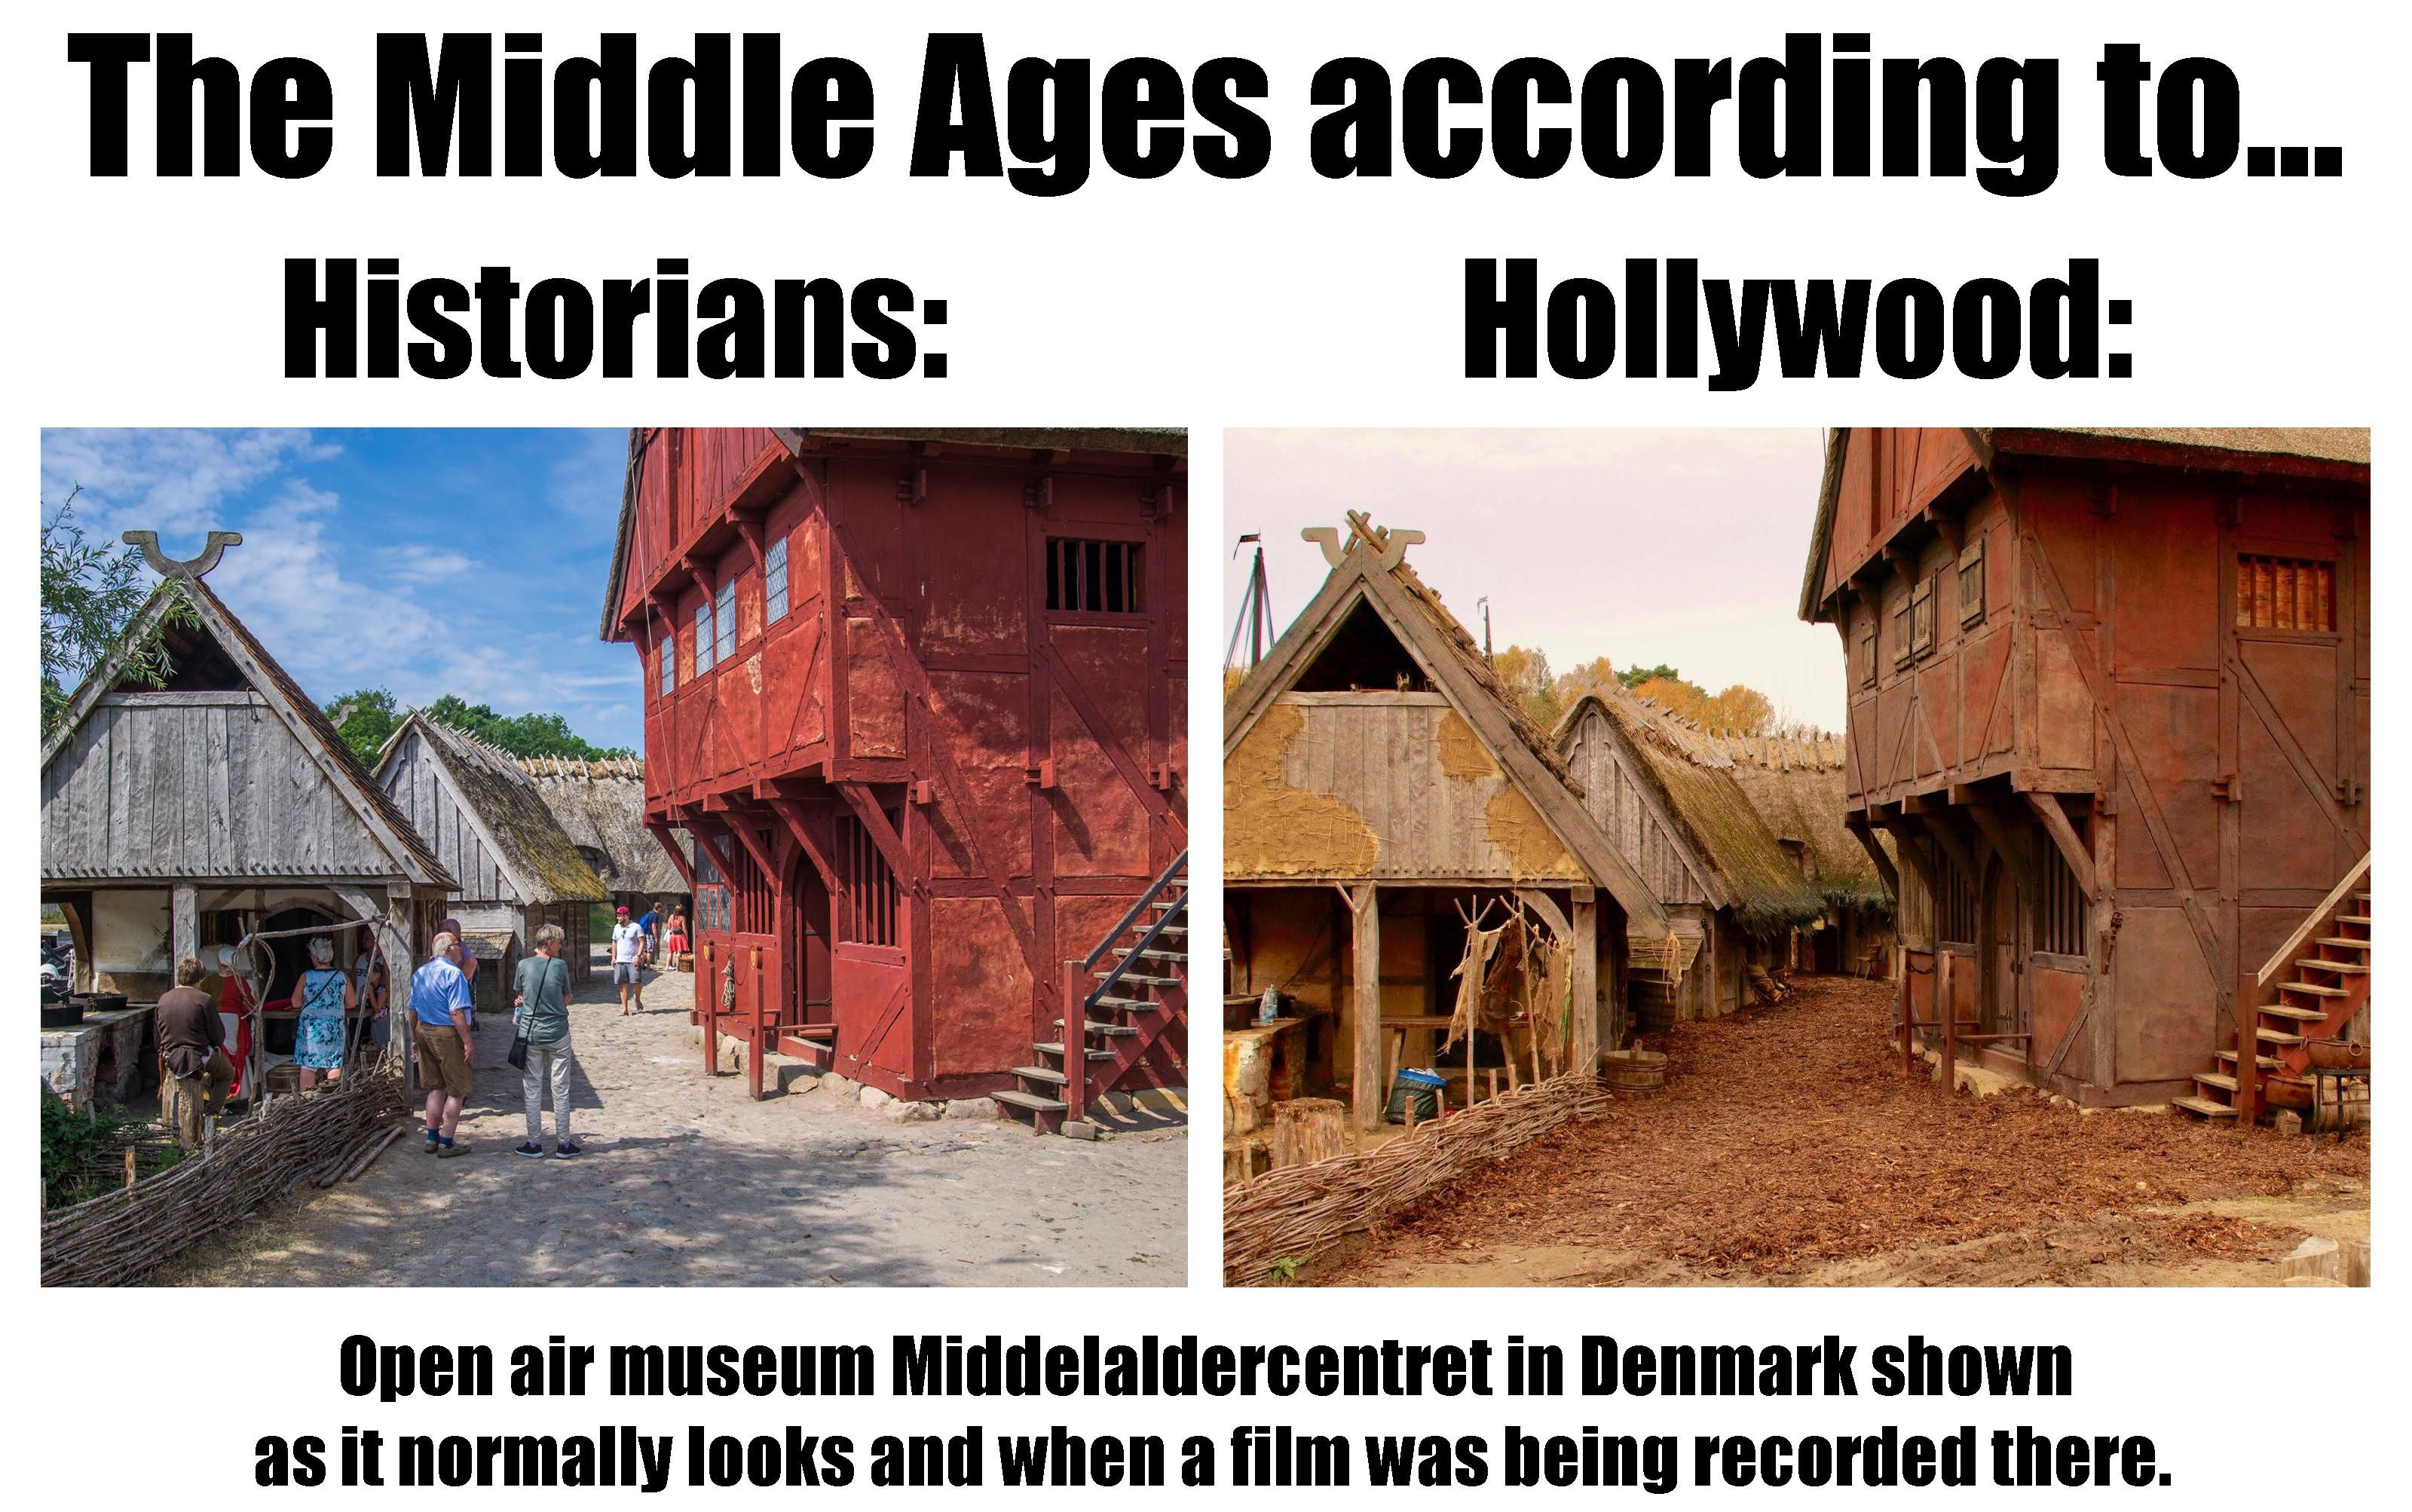 The Middle Ages according to historians VS the Middle Ages according to Hollywood